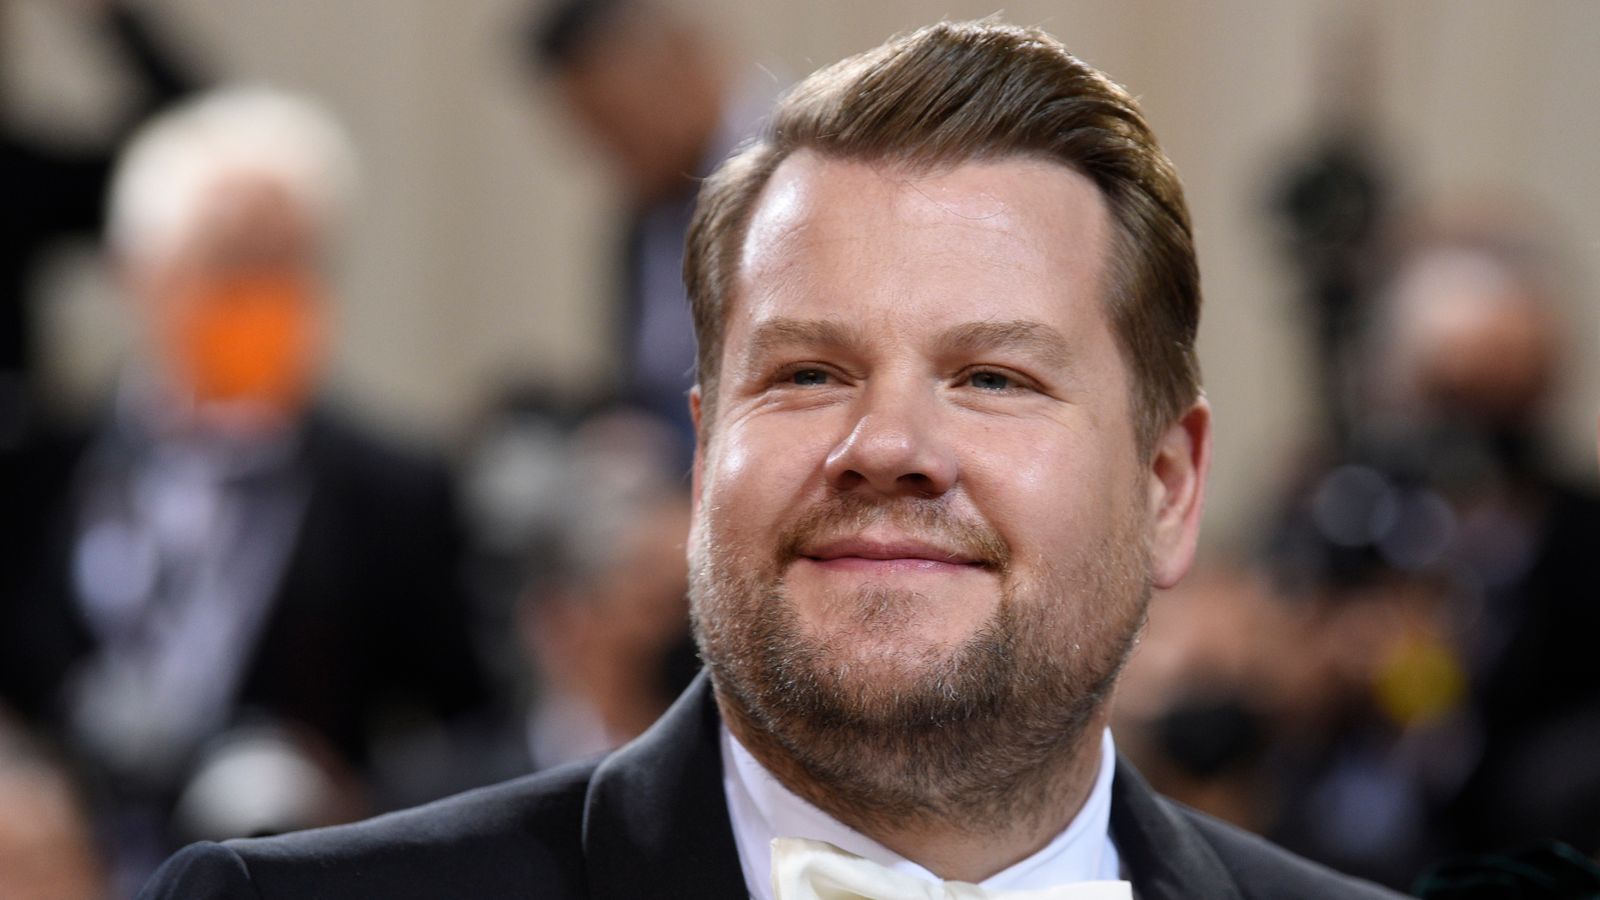 James Corden has restaurant ban lifted after 'apologising for abusive behaviour'